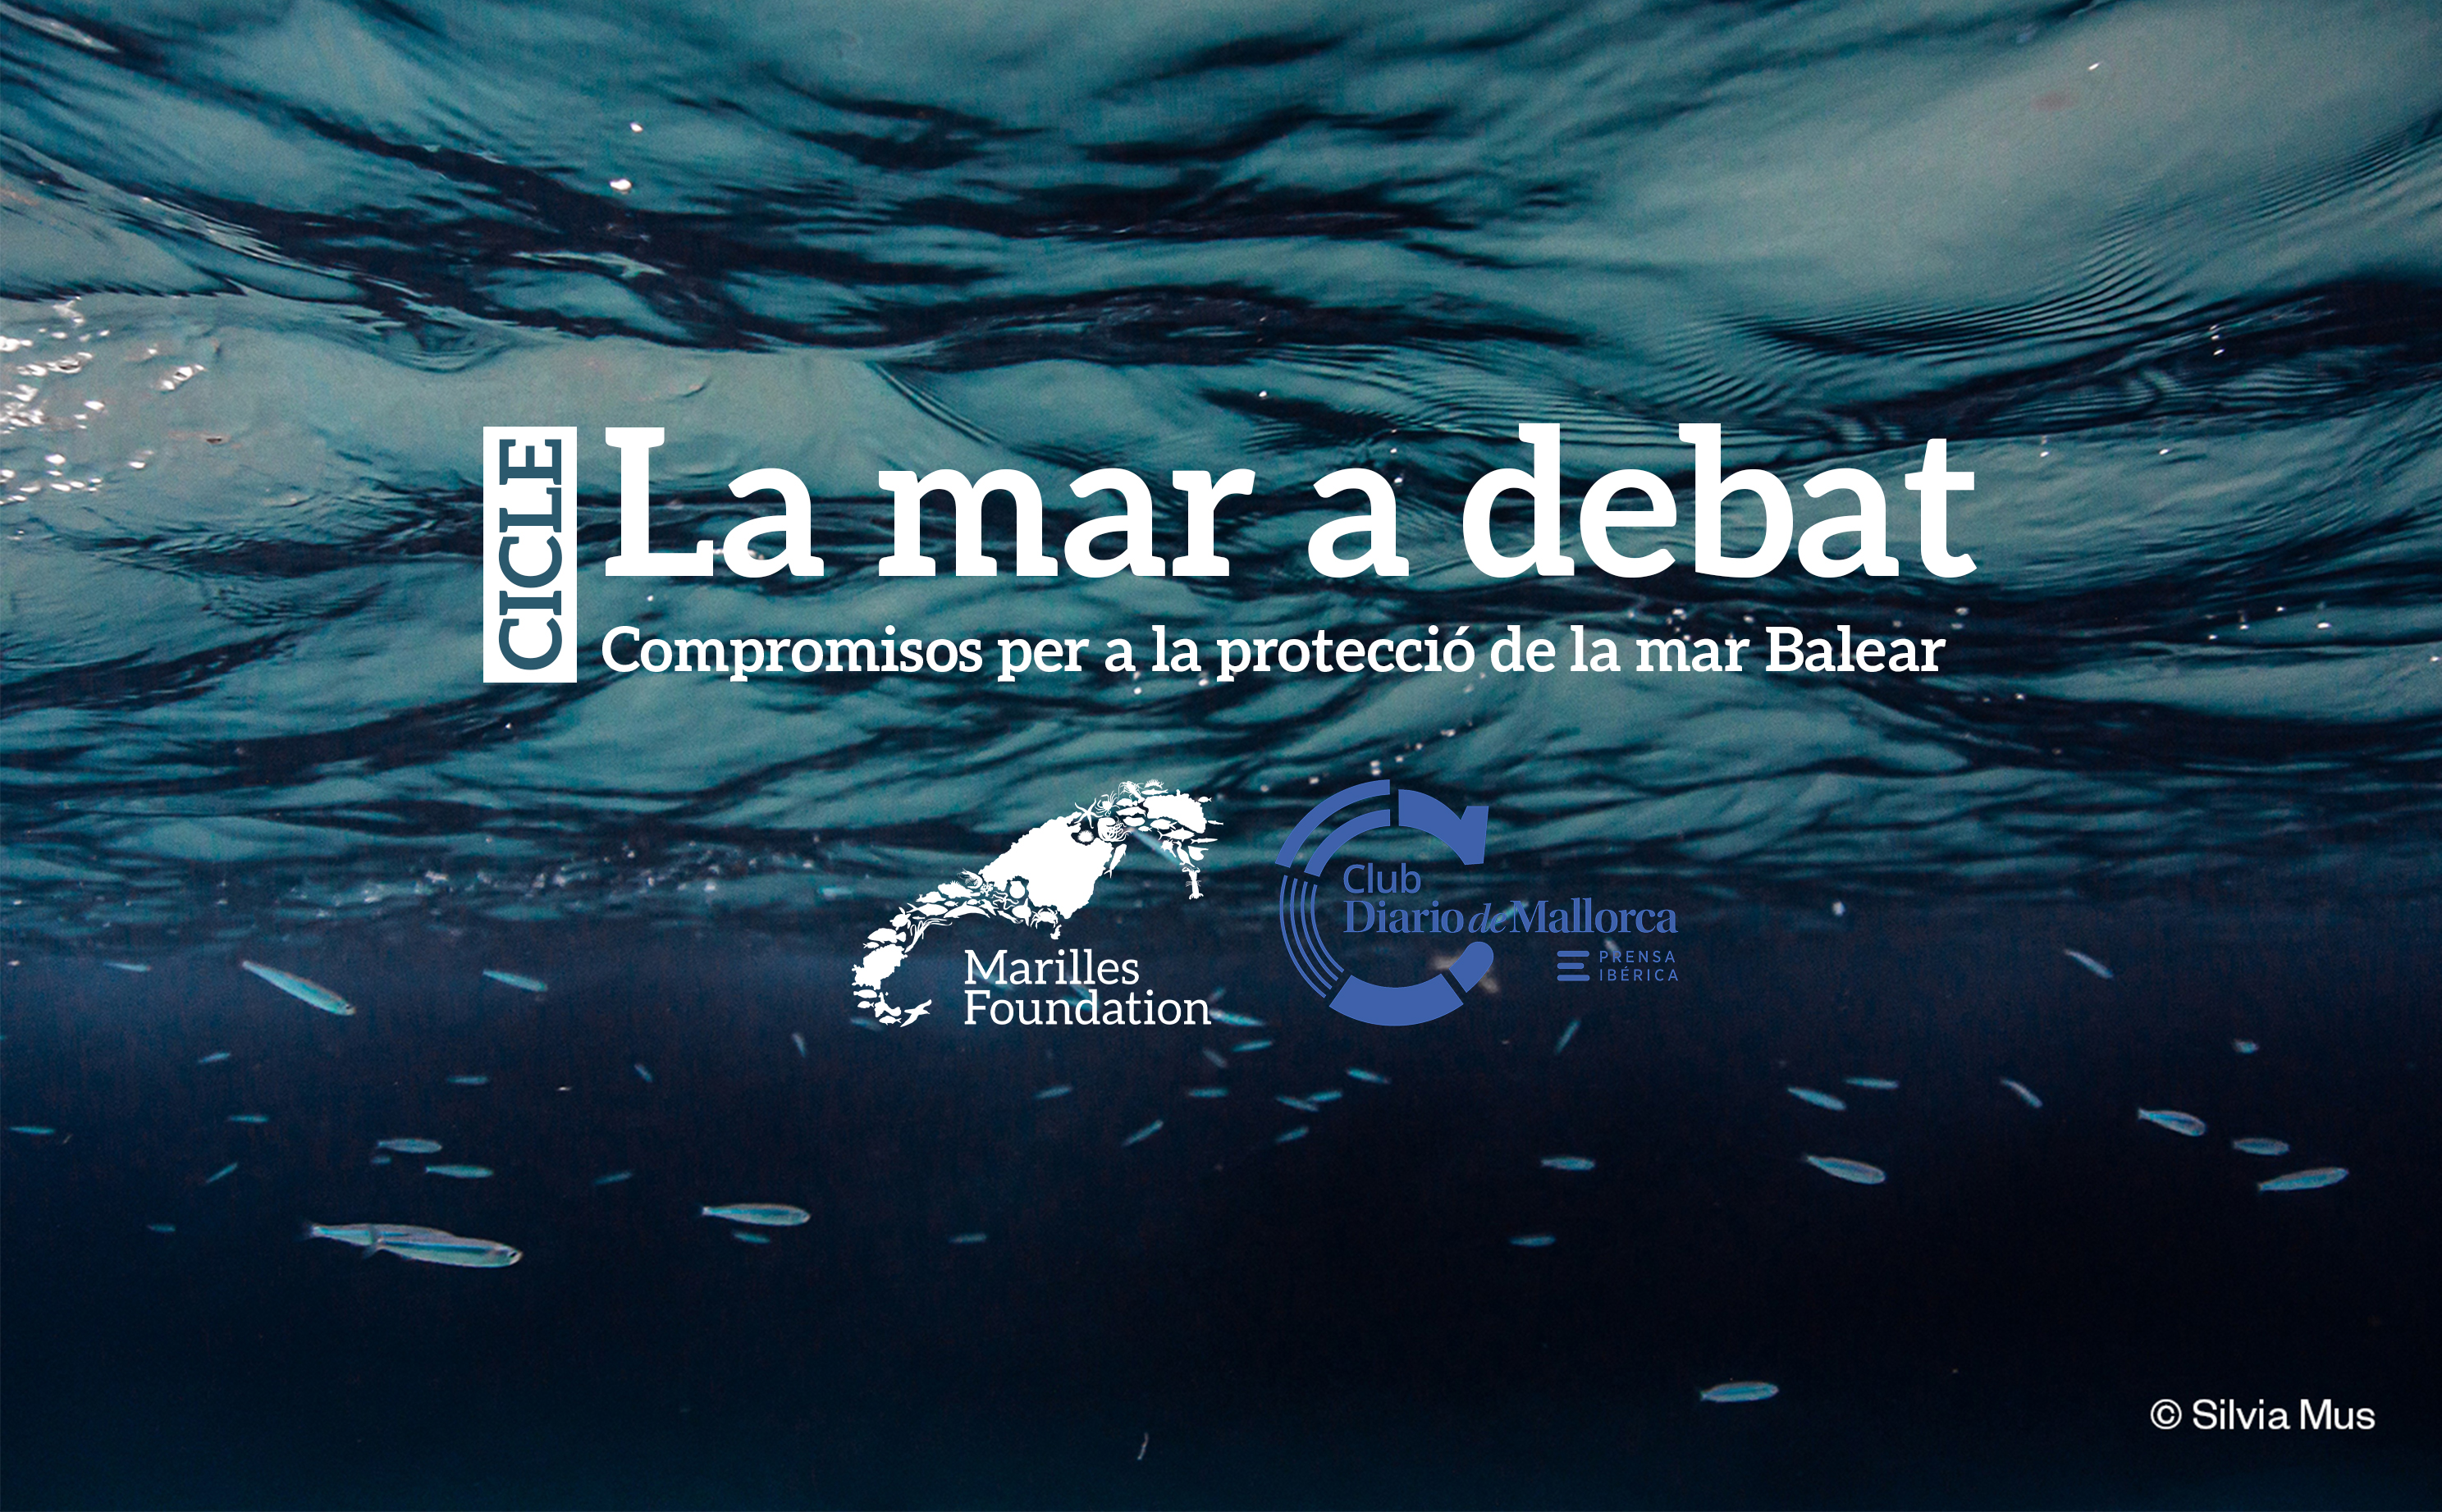 Fishers, business people, politicians, yacht club members, and organised citizens seek solutions to conserve the Balearic Sea.